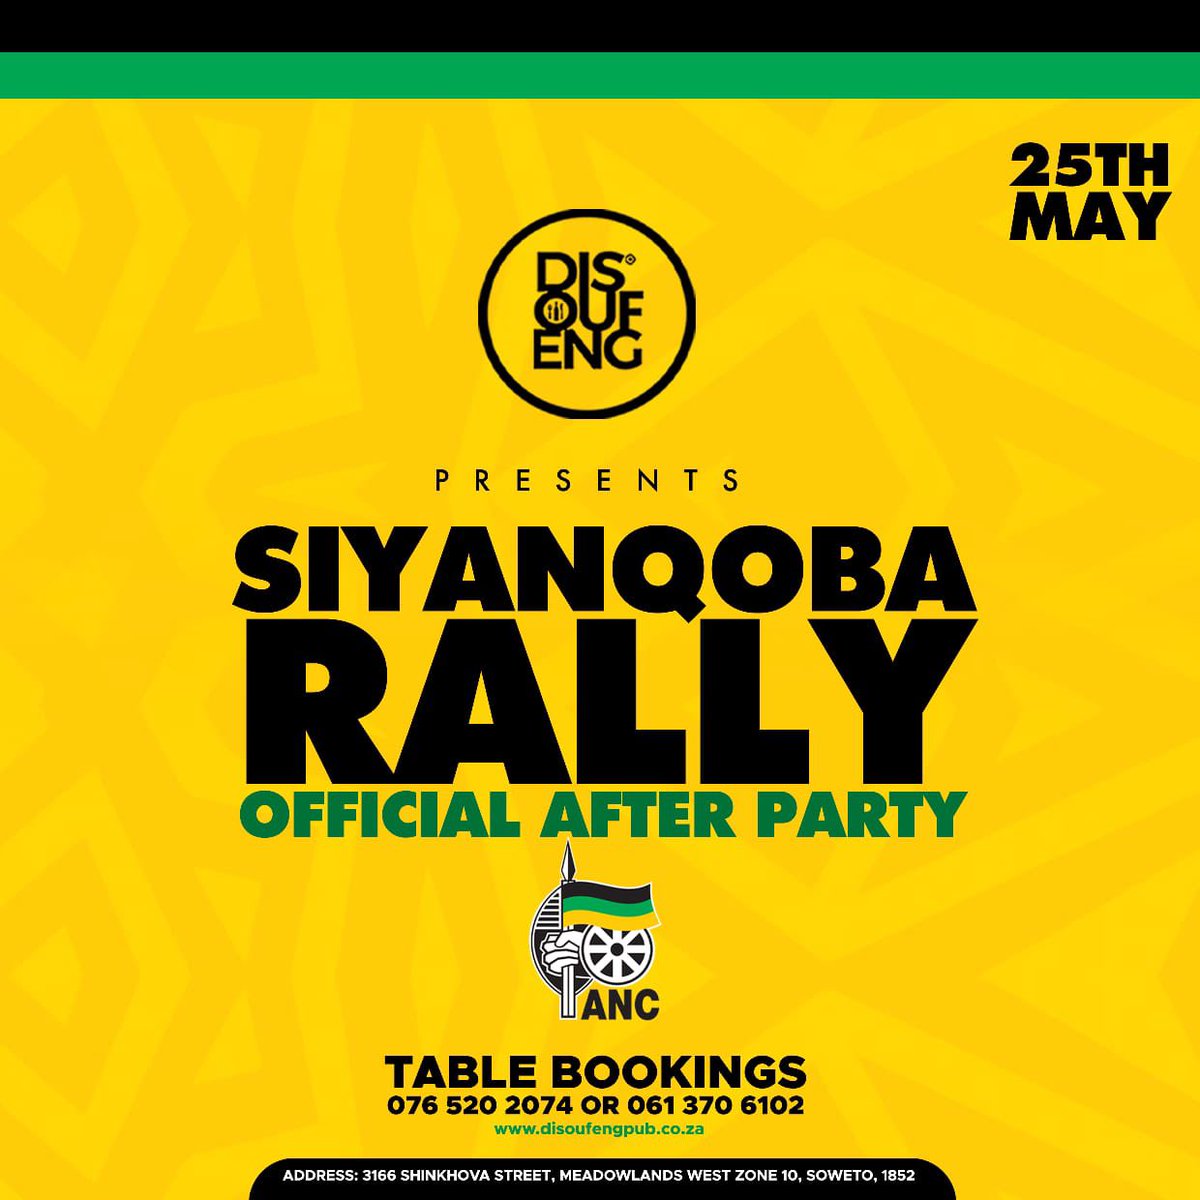 Okes come join us this coming Saturday at @DISOUFENG_PUB where there will be the ANC Siyanqoba Rally after party hosted by your favorite hosts 💃🤝 25 May, save the date 📅 #AncAtDisoufeng #SiyanqobaRally SiyanqobaRally